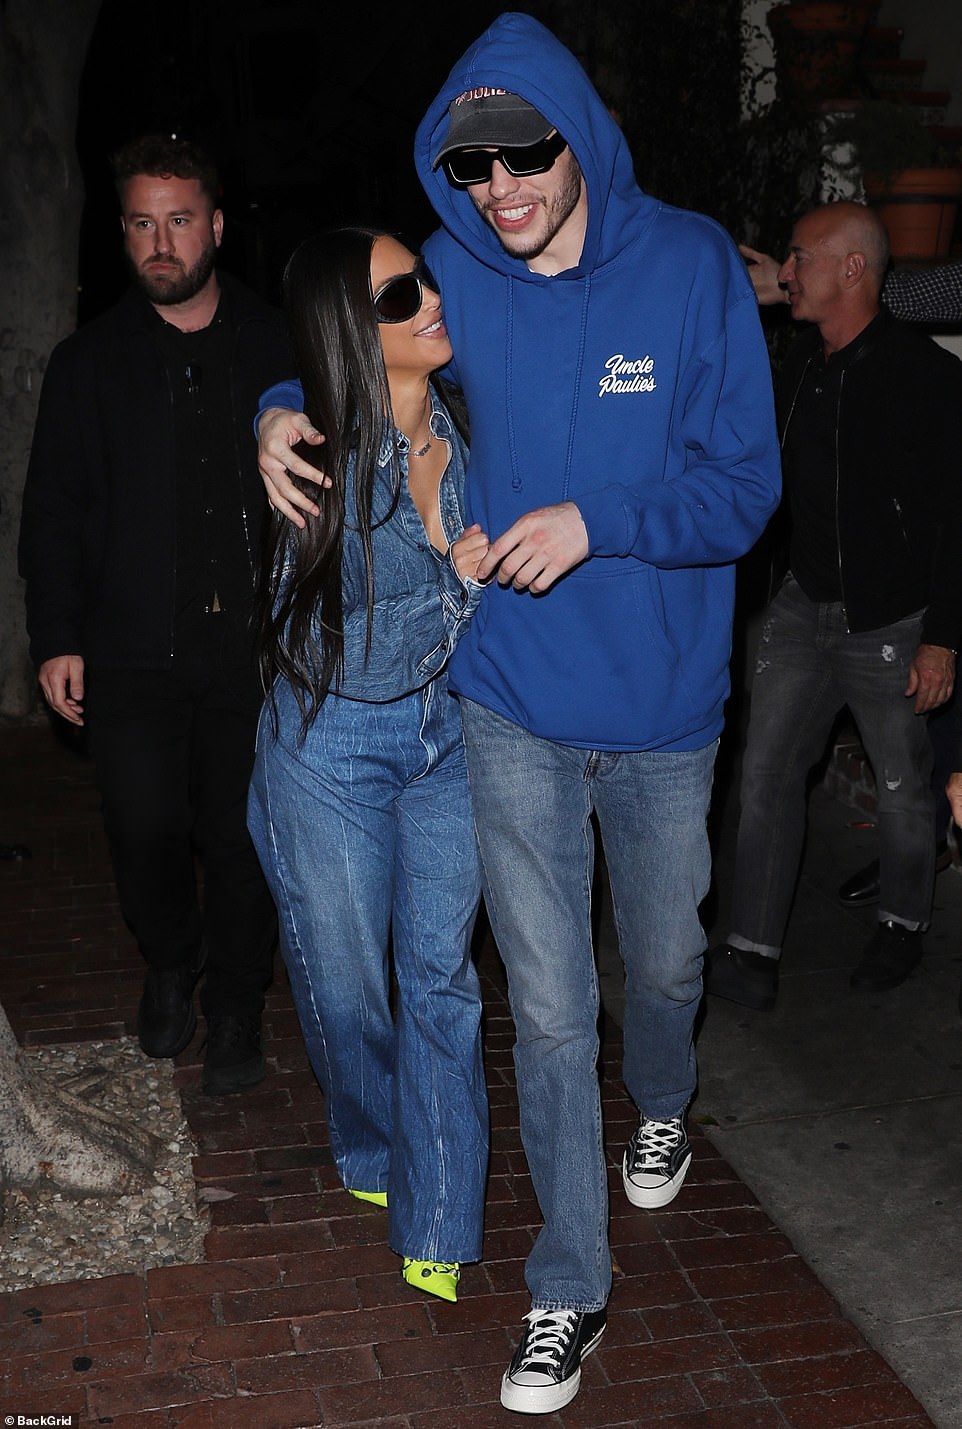 Kim Kardashian and SNL star Pete Davidson were happy Monday night as they left a double date with Amazon founder Jeff Bezos and girlfriend Lauren Sanchez